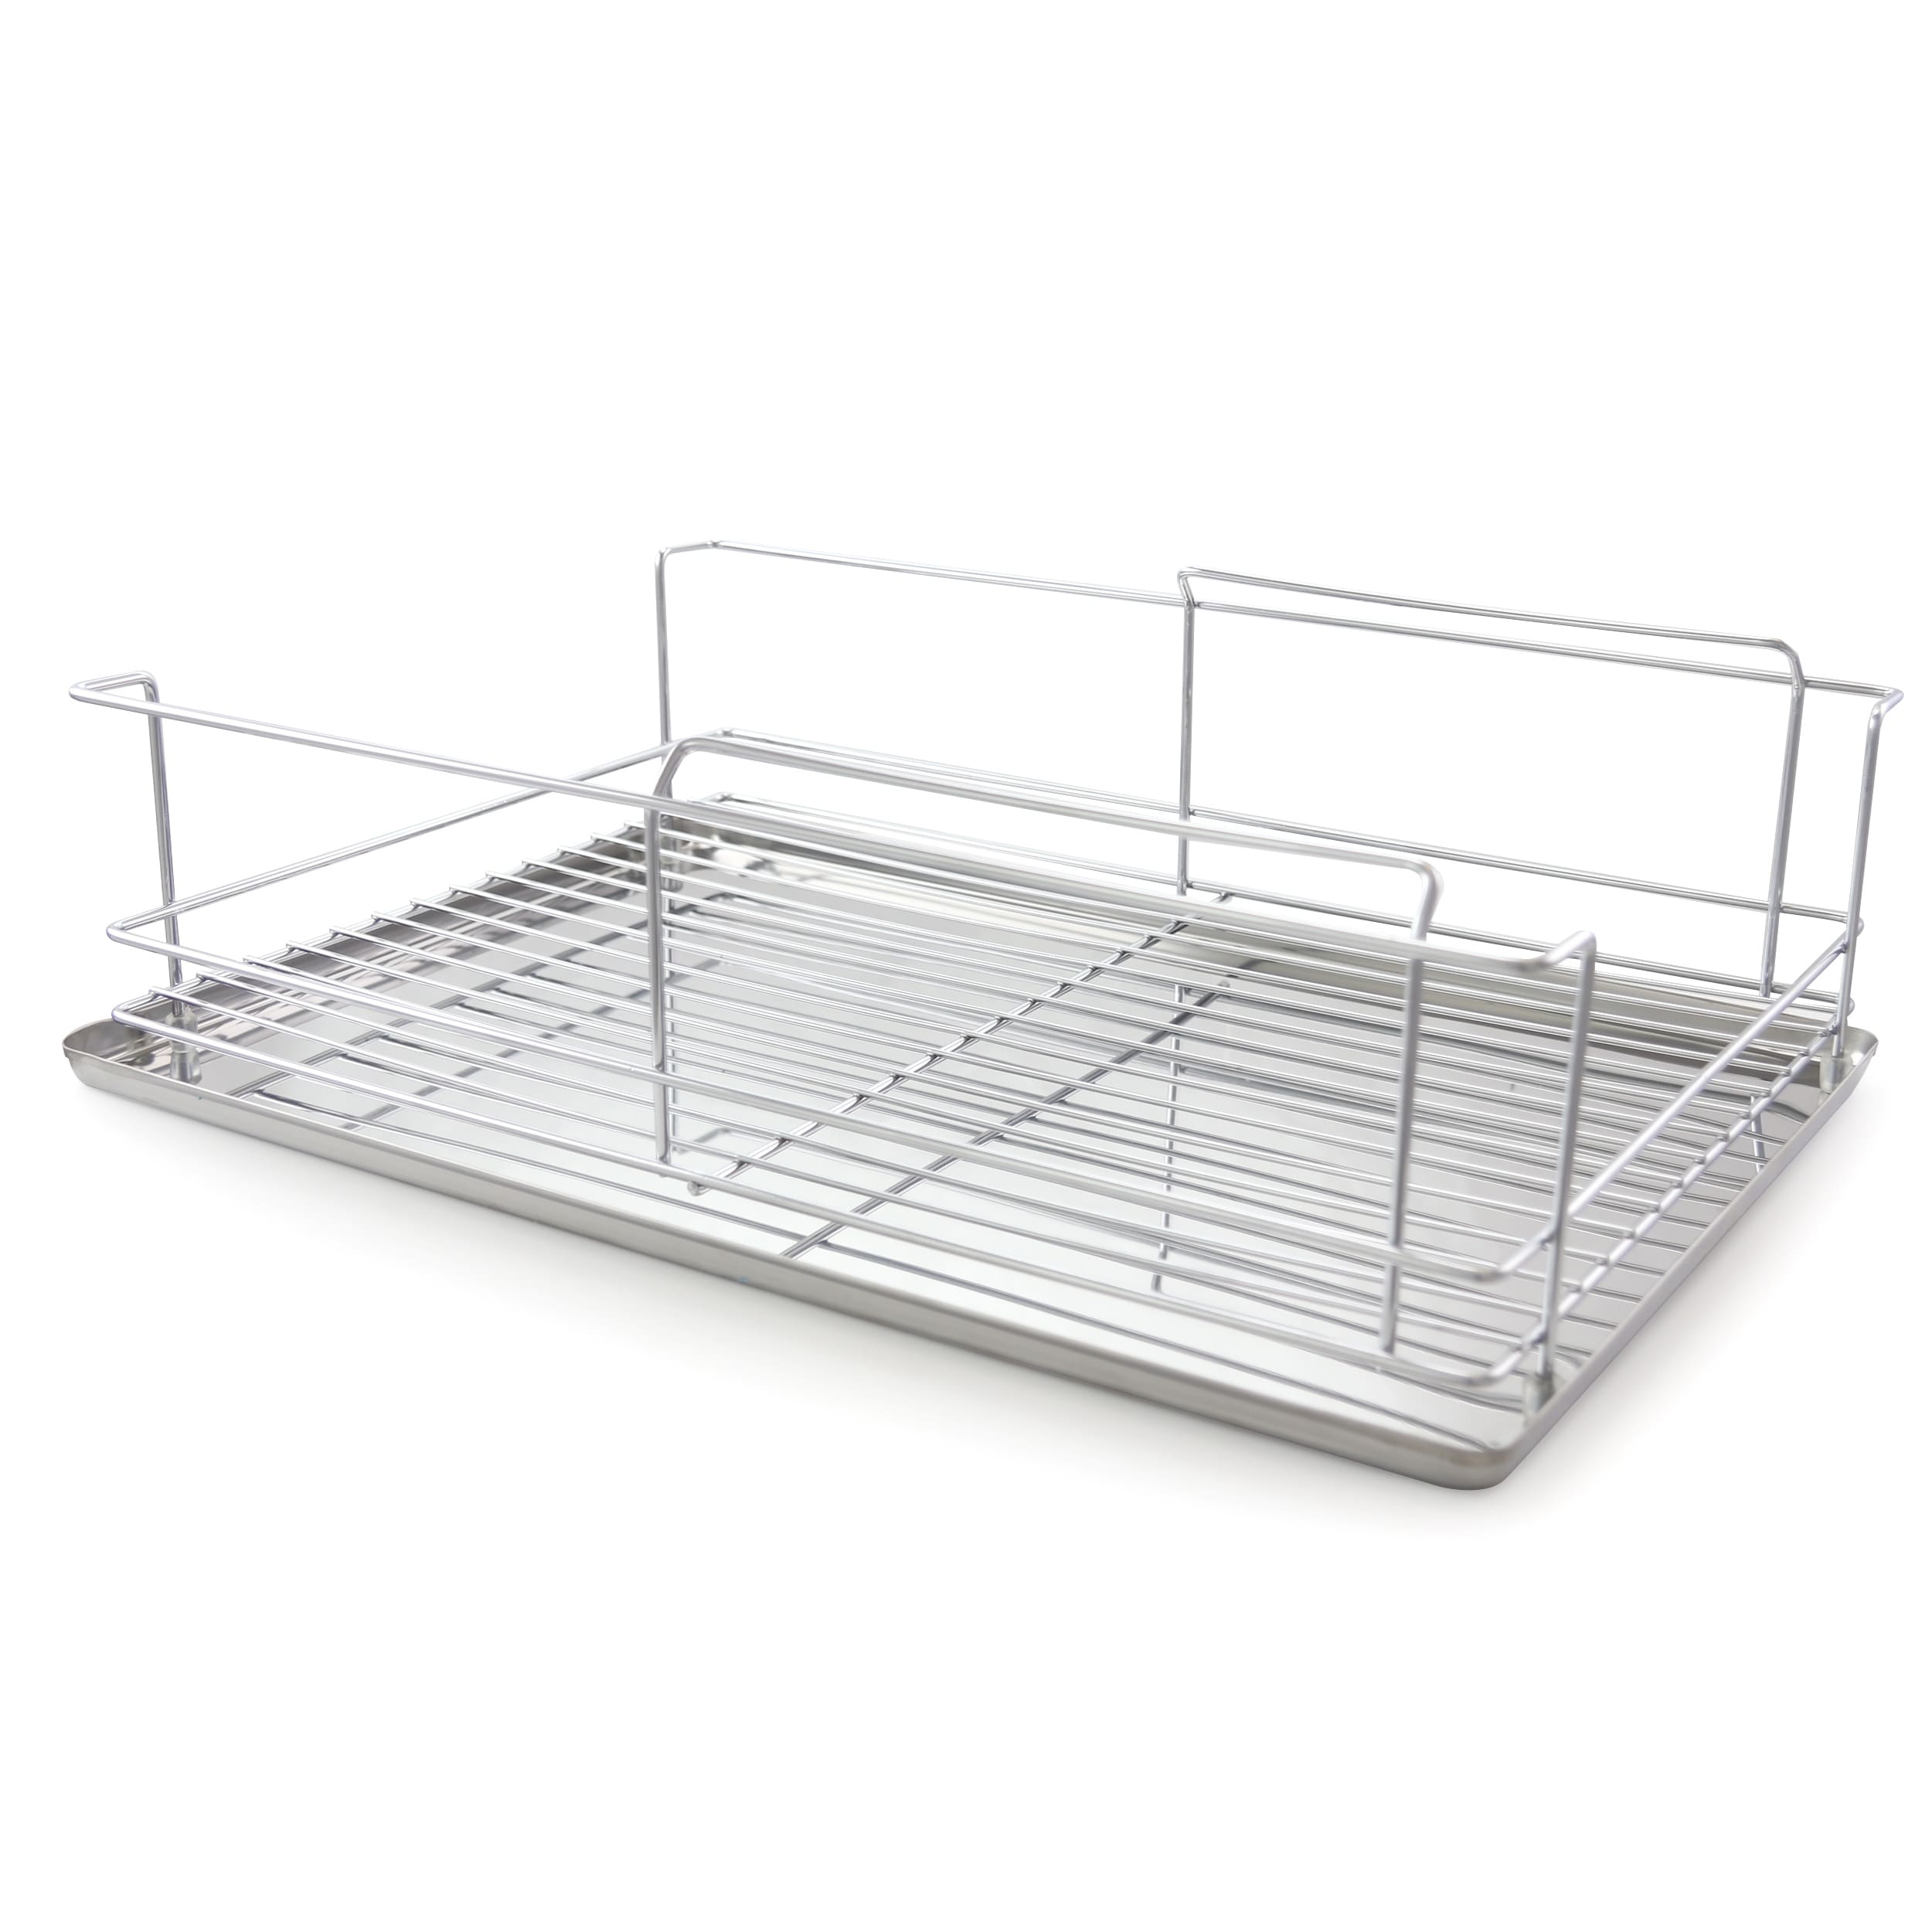 https://ak1.ostkcdn.com/images/products/is/images/direct/07c8a5cb733fd48d495ef4e5db8e2d656c8e7f51/Better-Chef-22-Inch-Dish-Rack.jpg